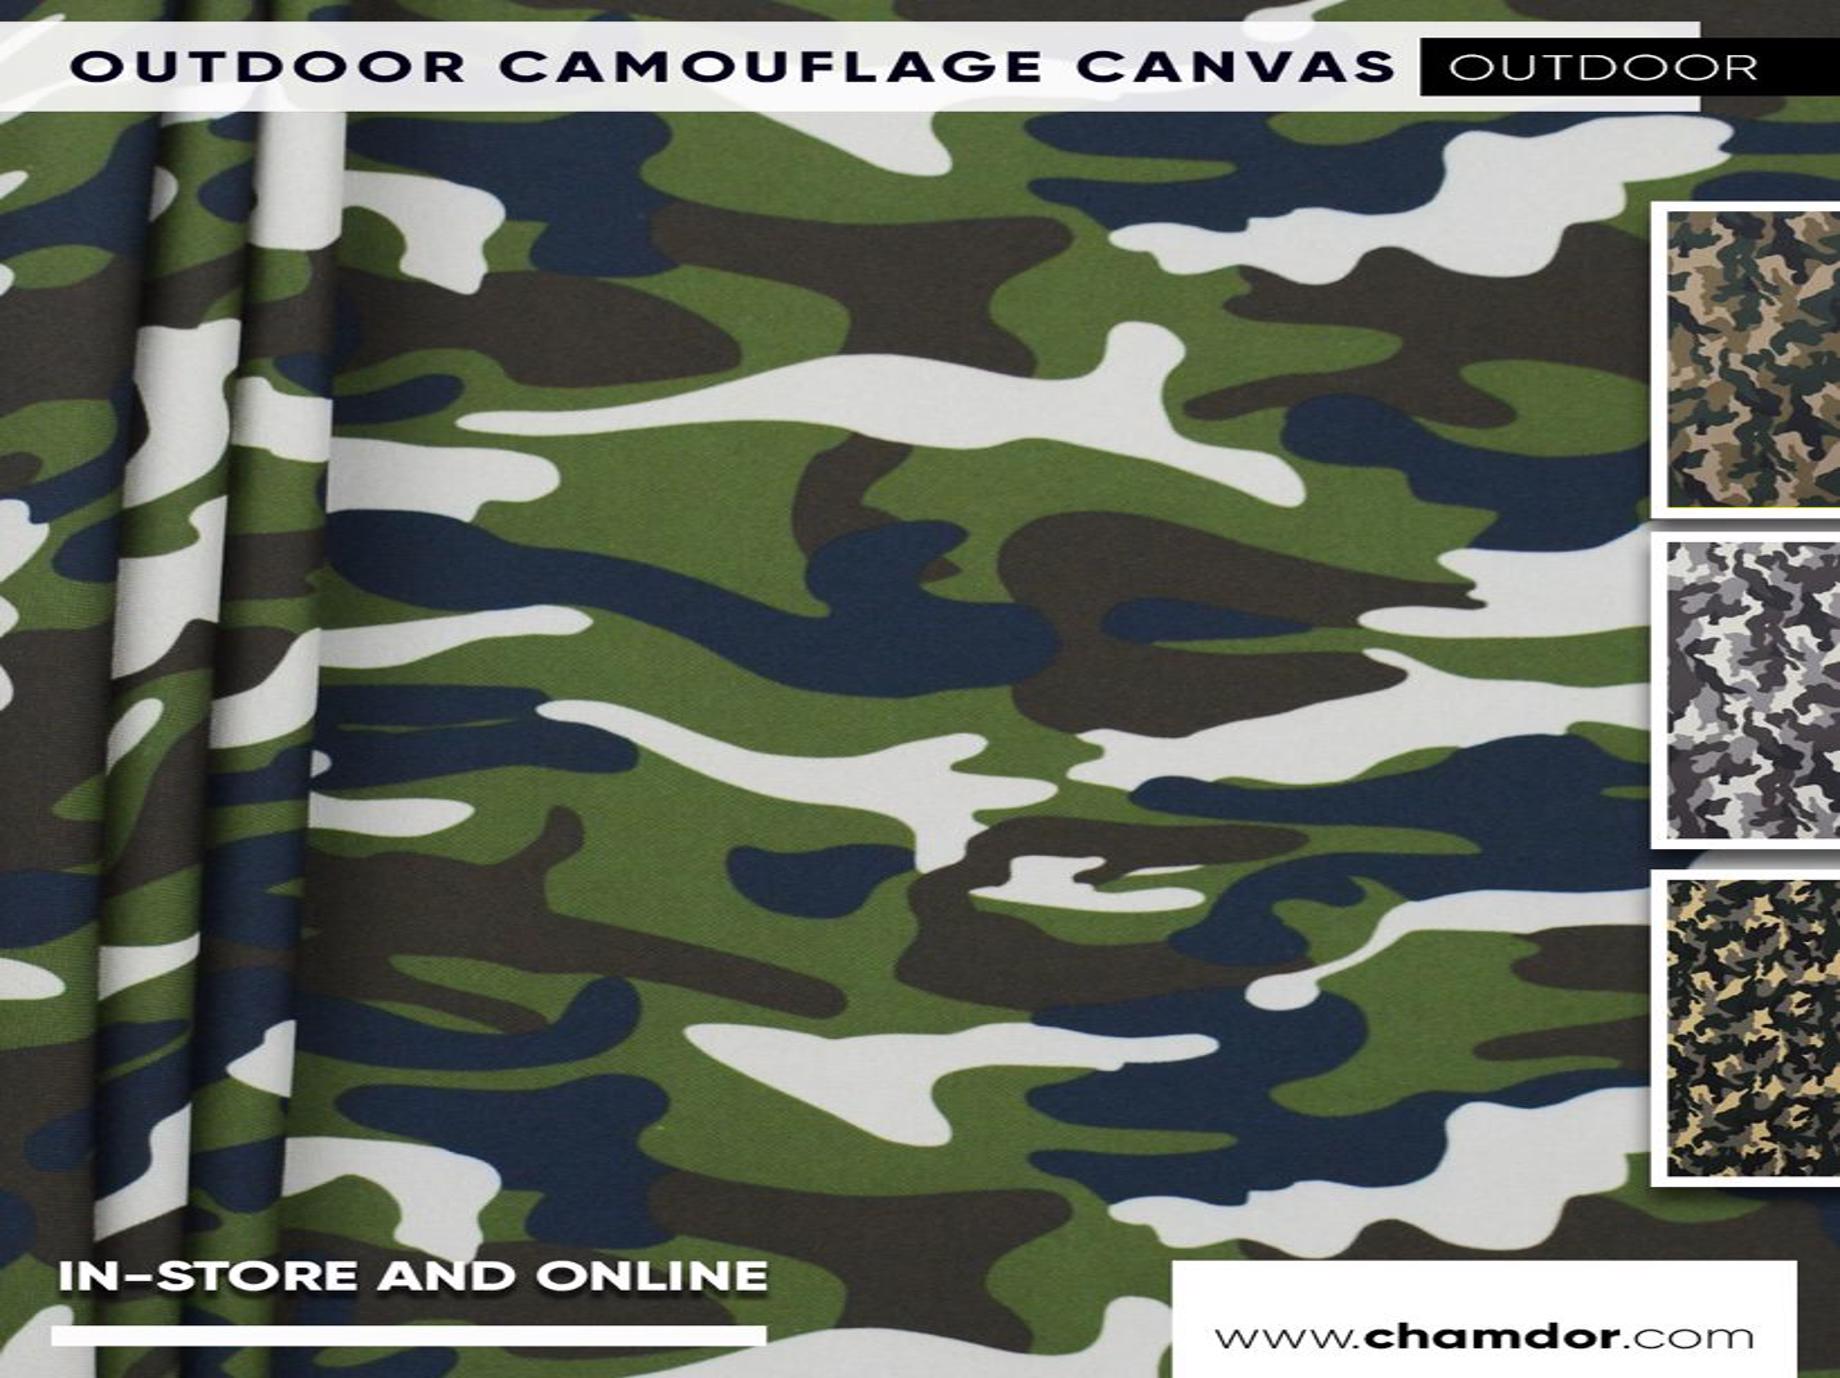 Outdoor Camouflage Canvas